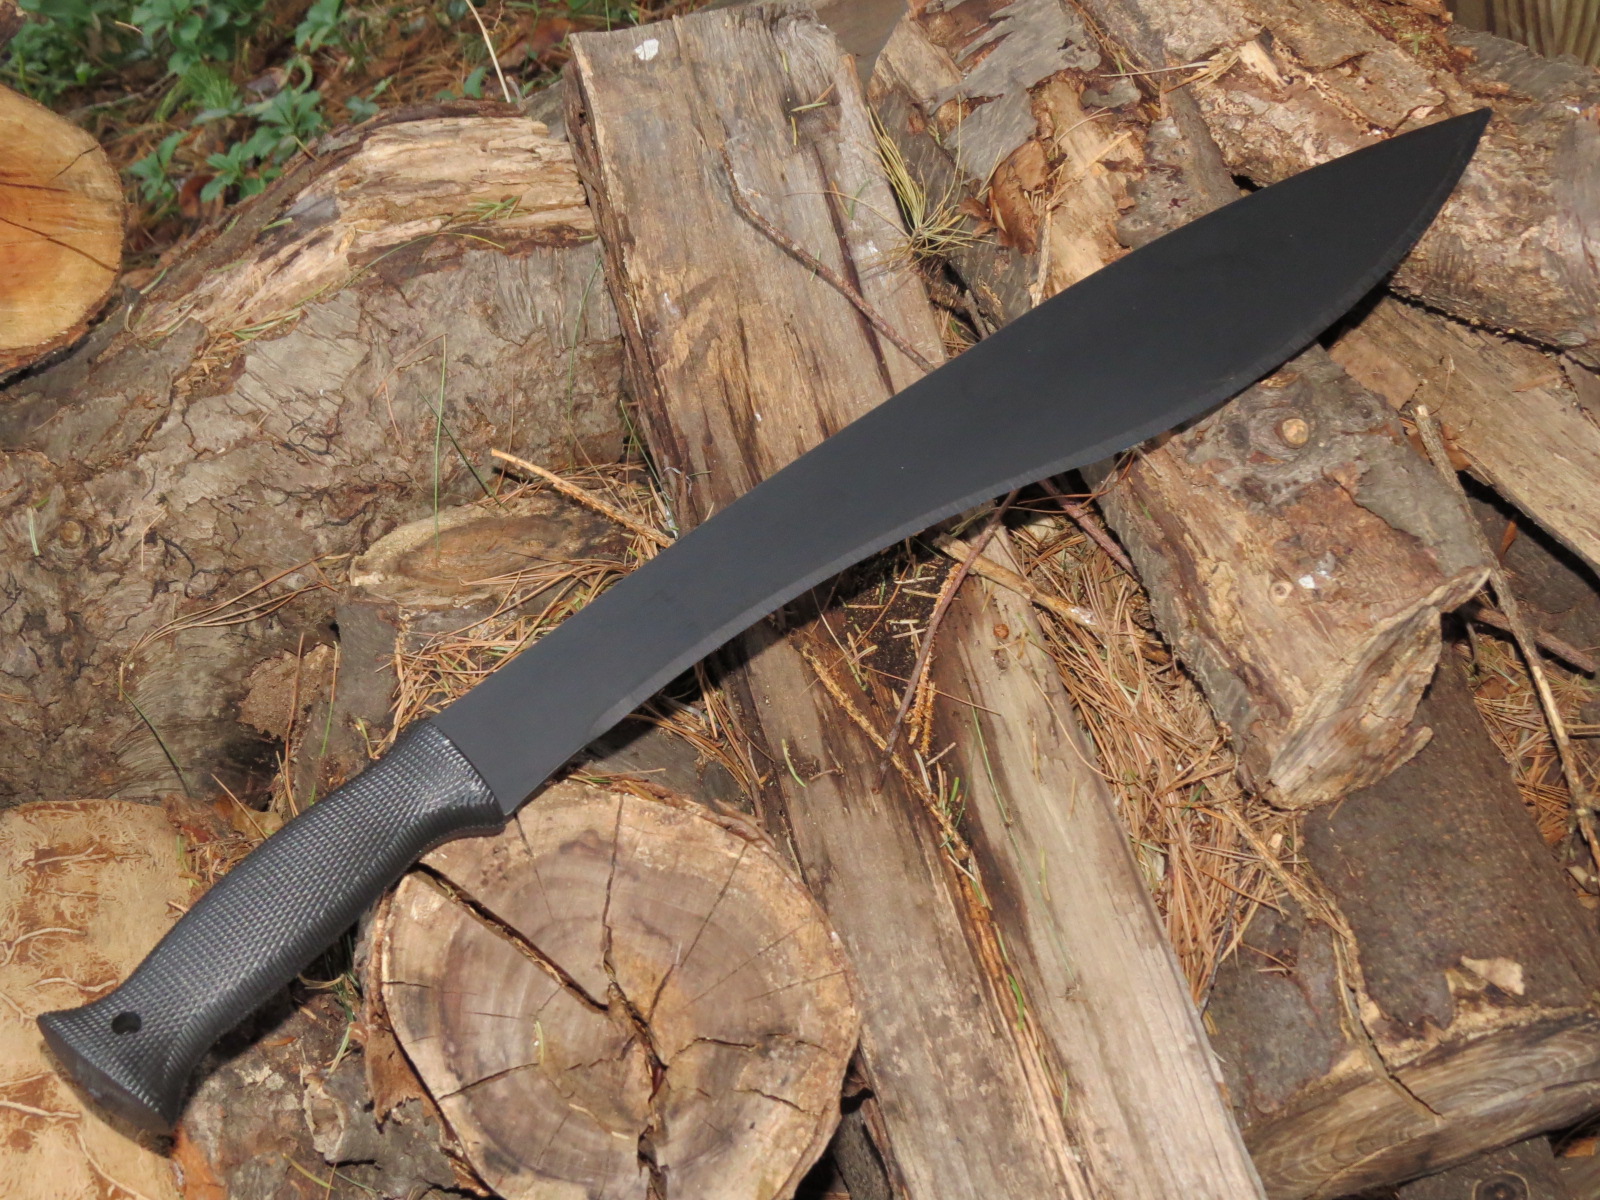 Machetes are a great tool for any camper